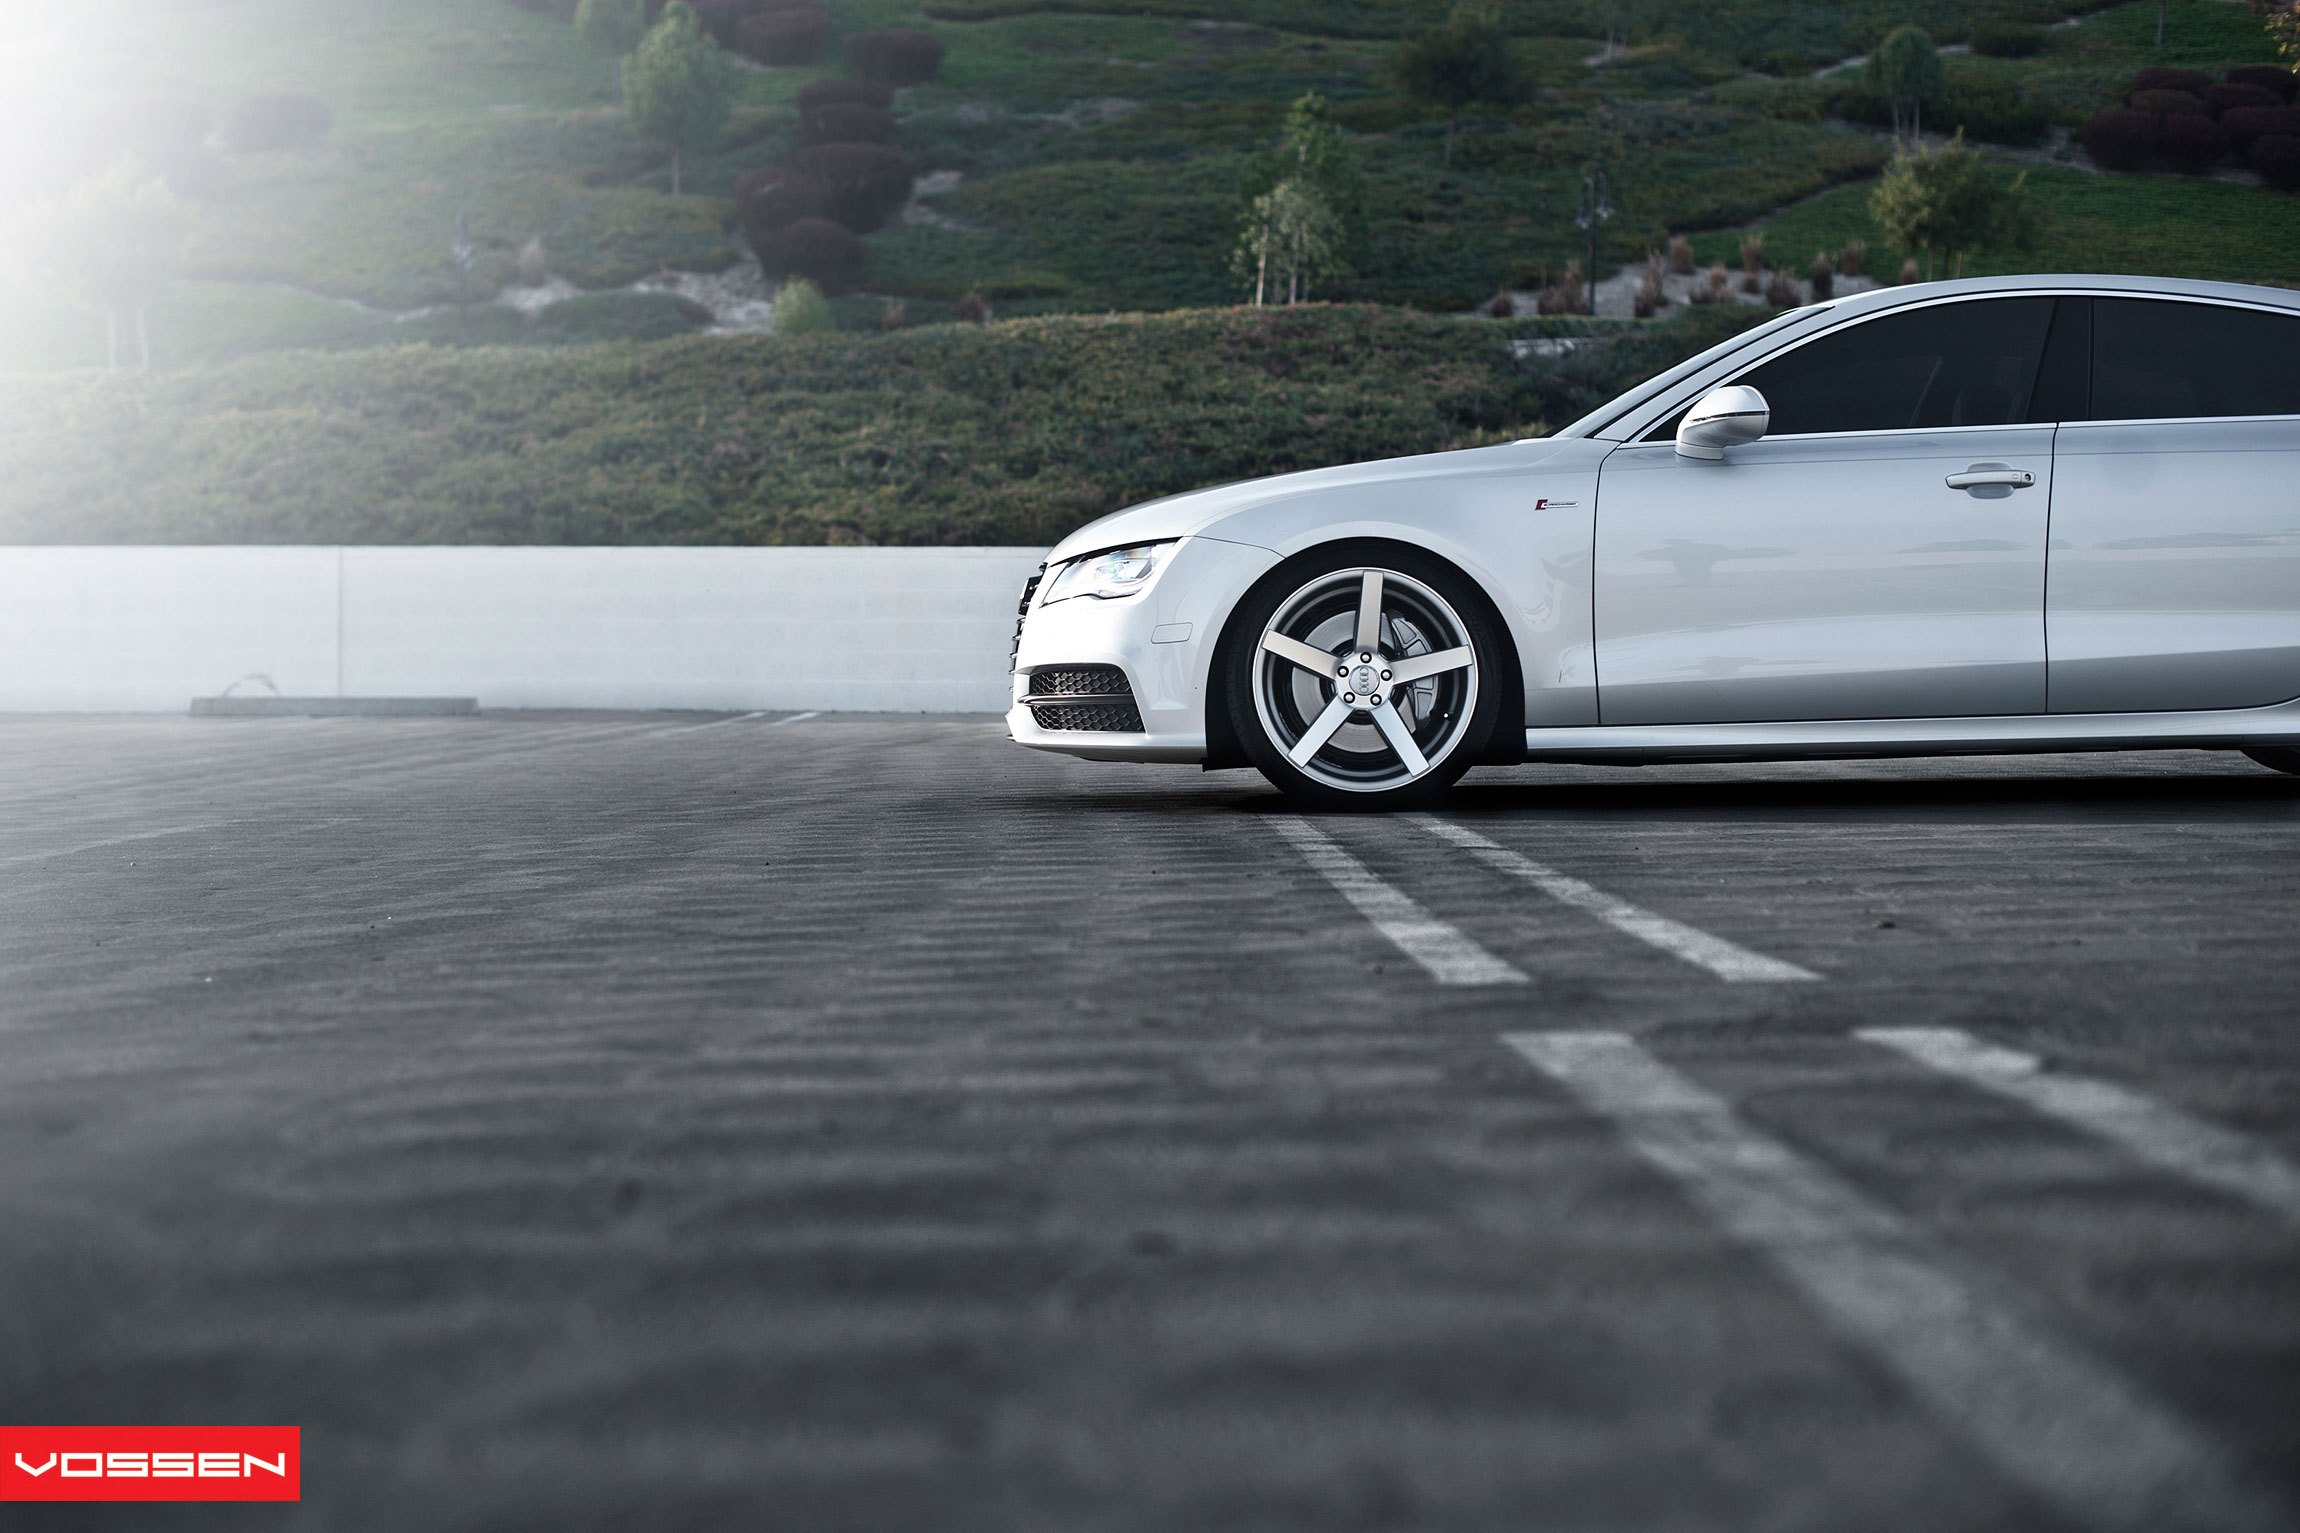 Aftermarket LED Headlights on Silver Audi A7 - Photo by Vossen